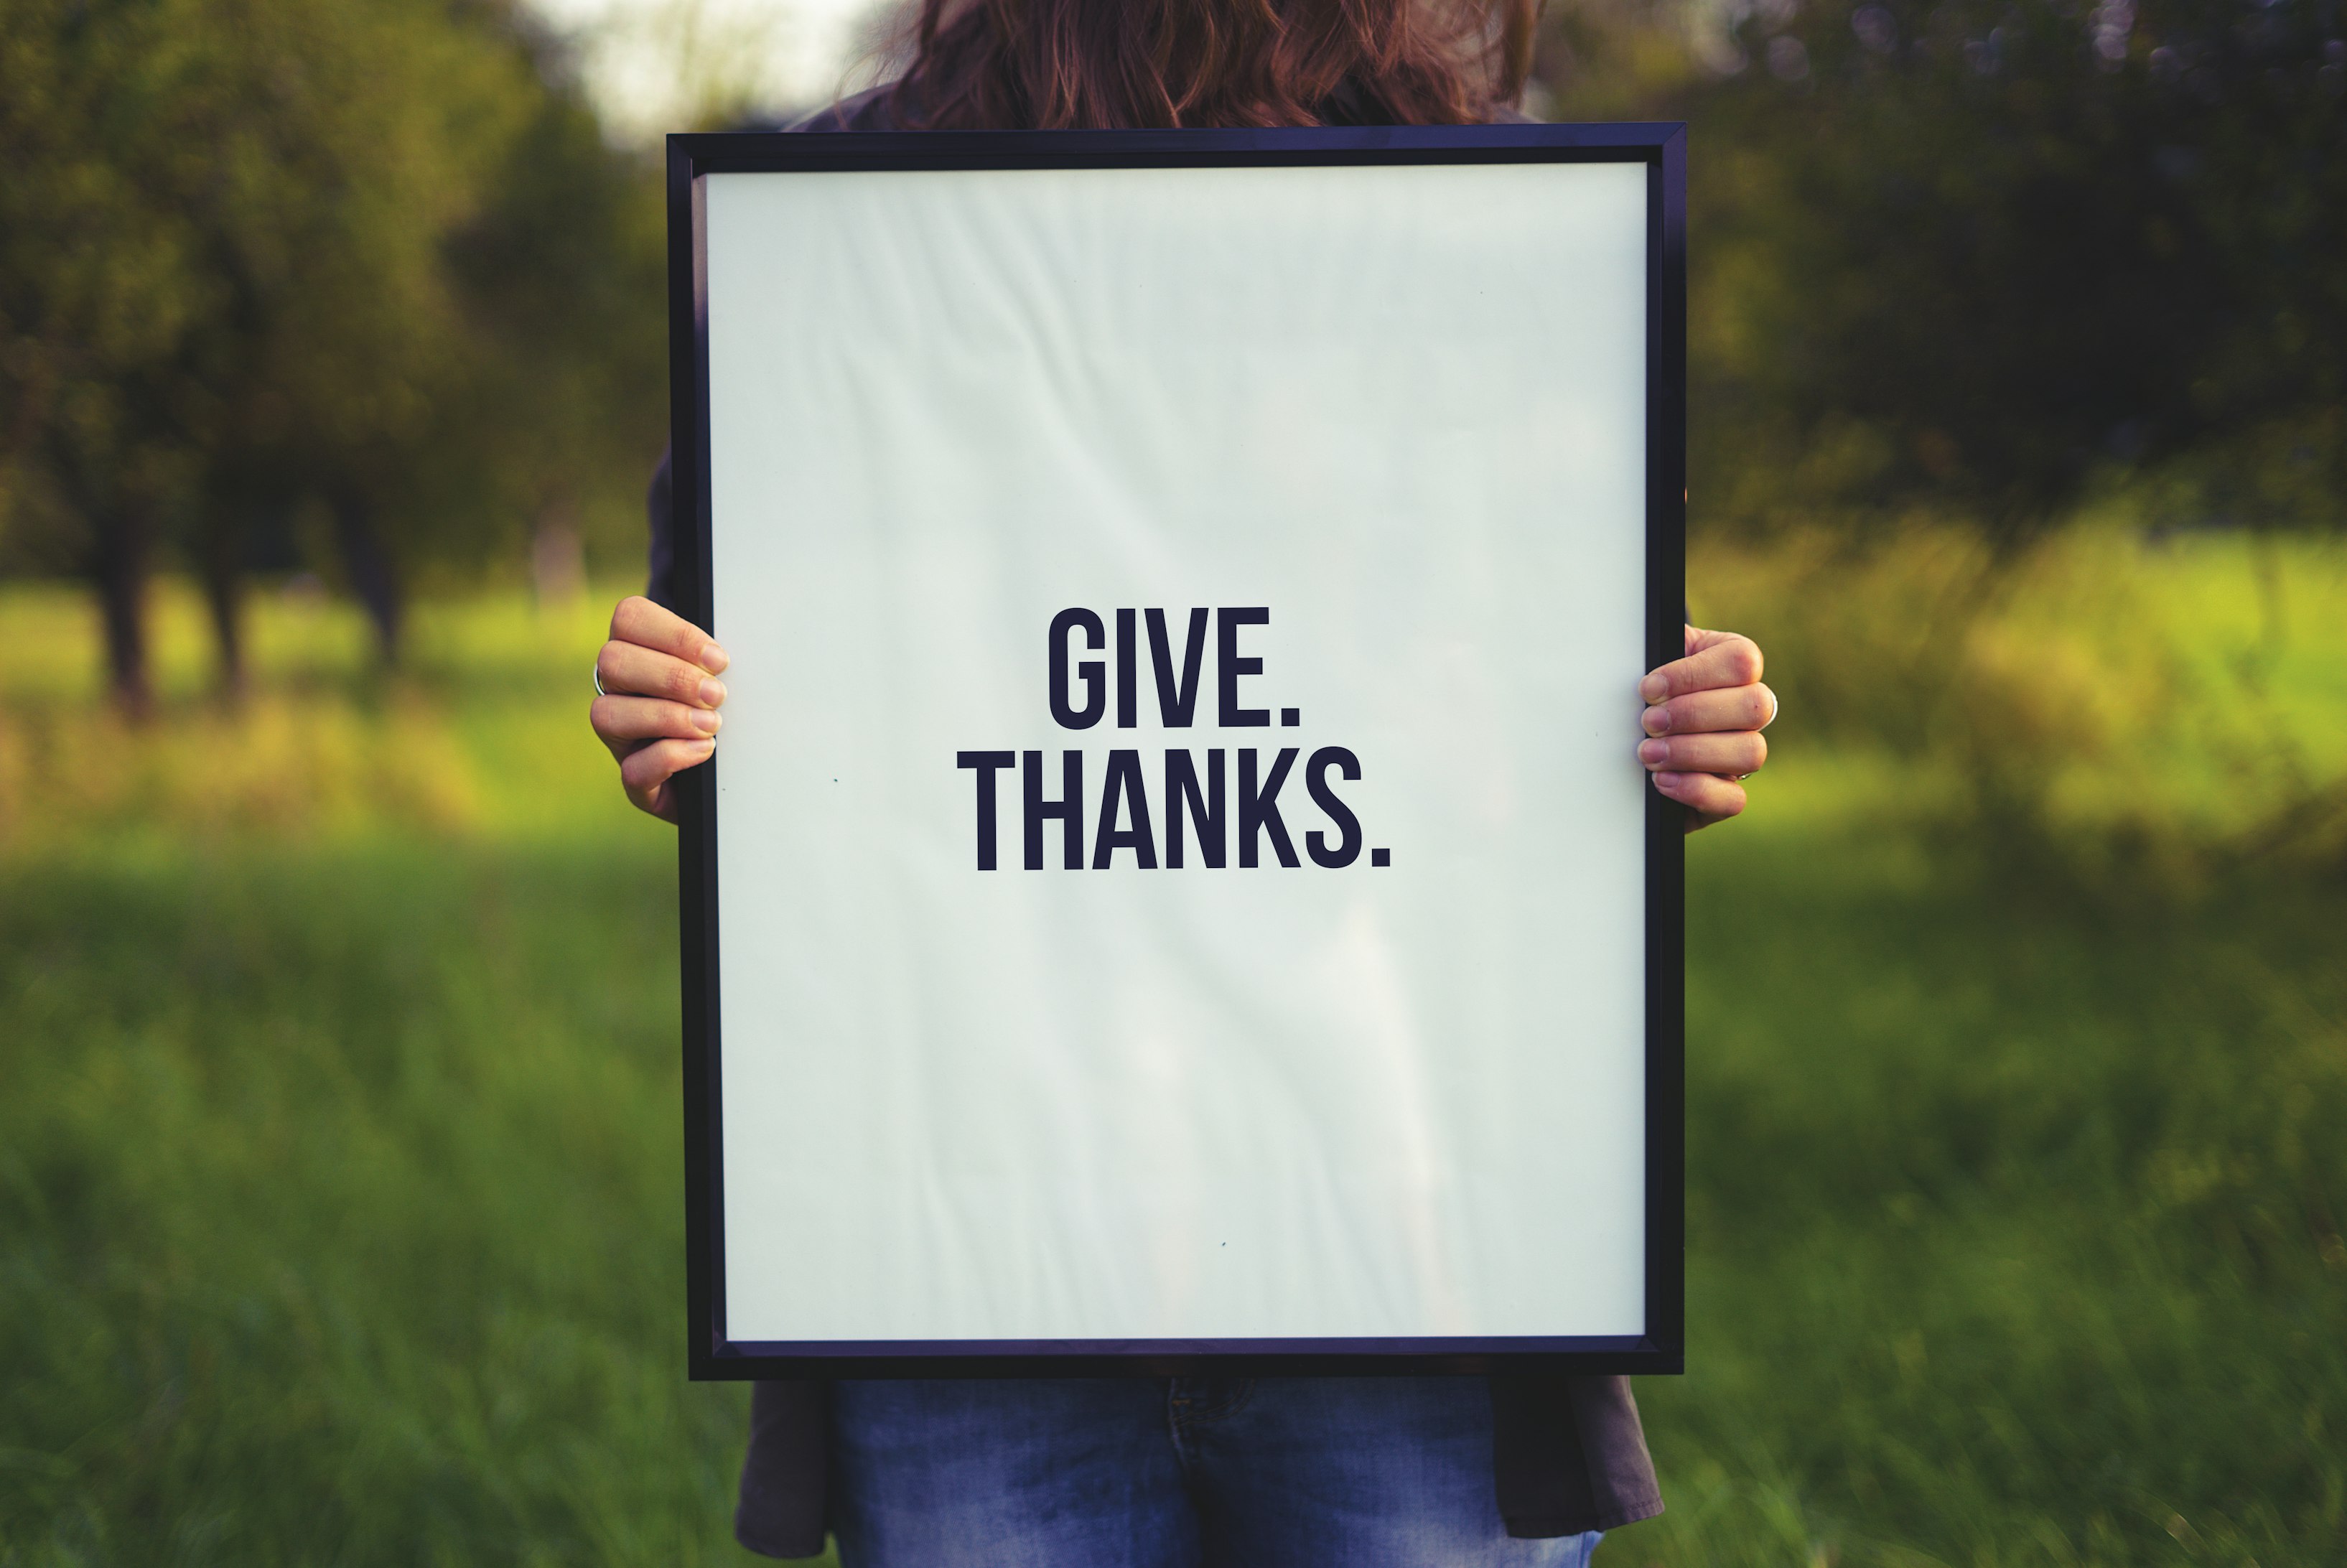 100+ Best Thank You for Dinner Messages: Show Appreciation with Heartfelt Gratitude